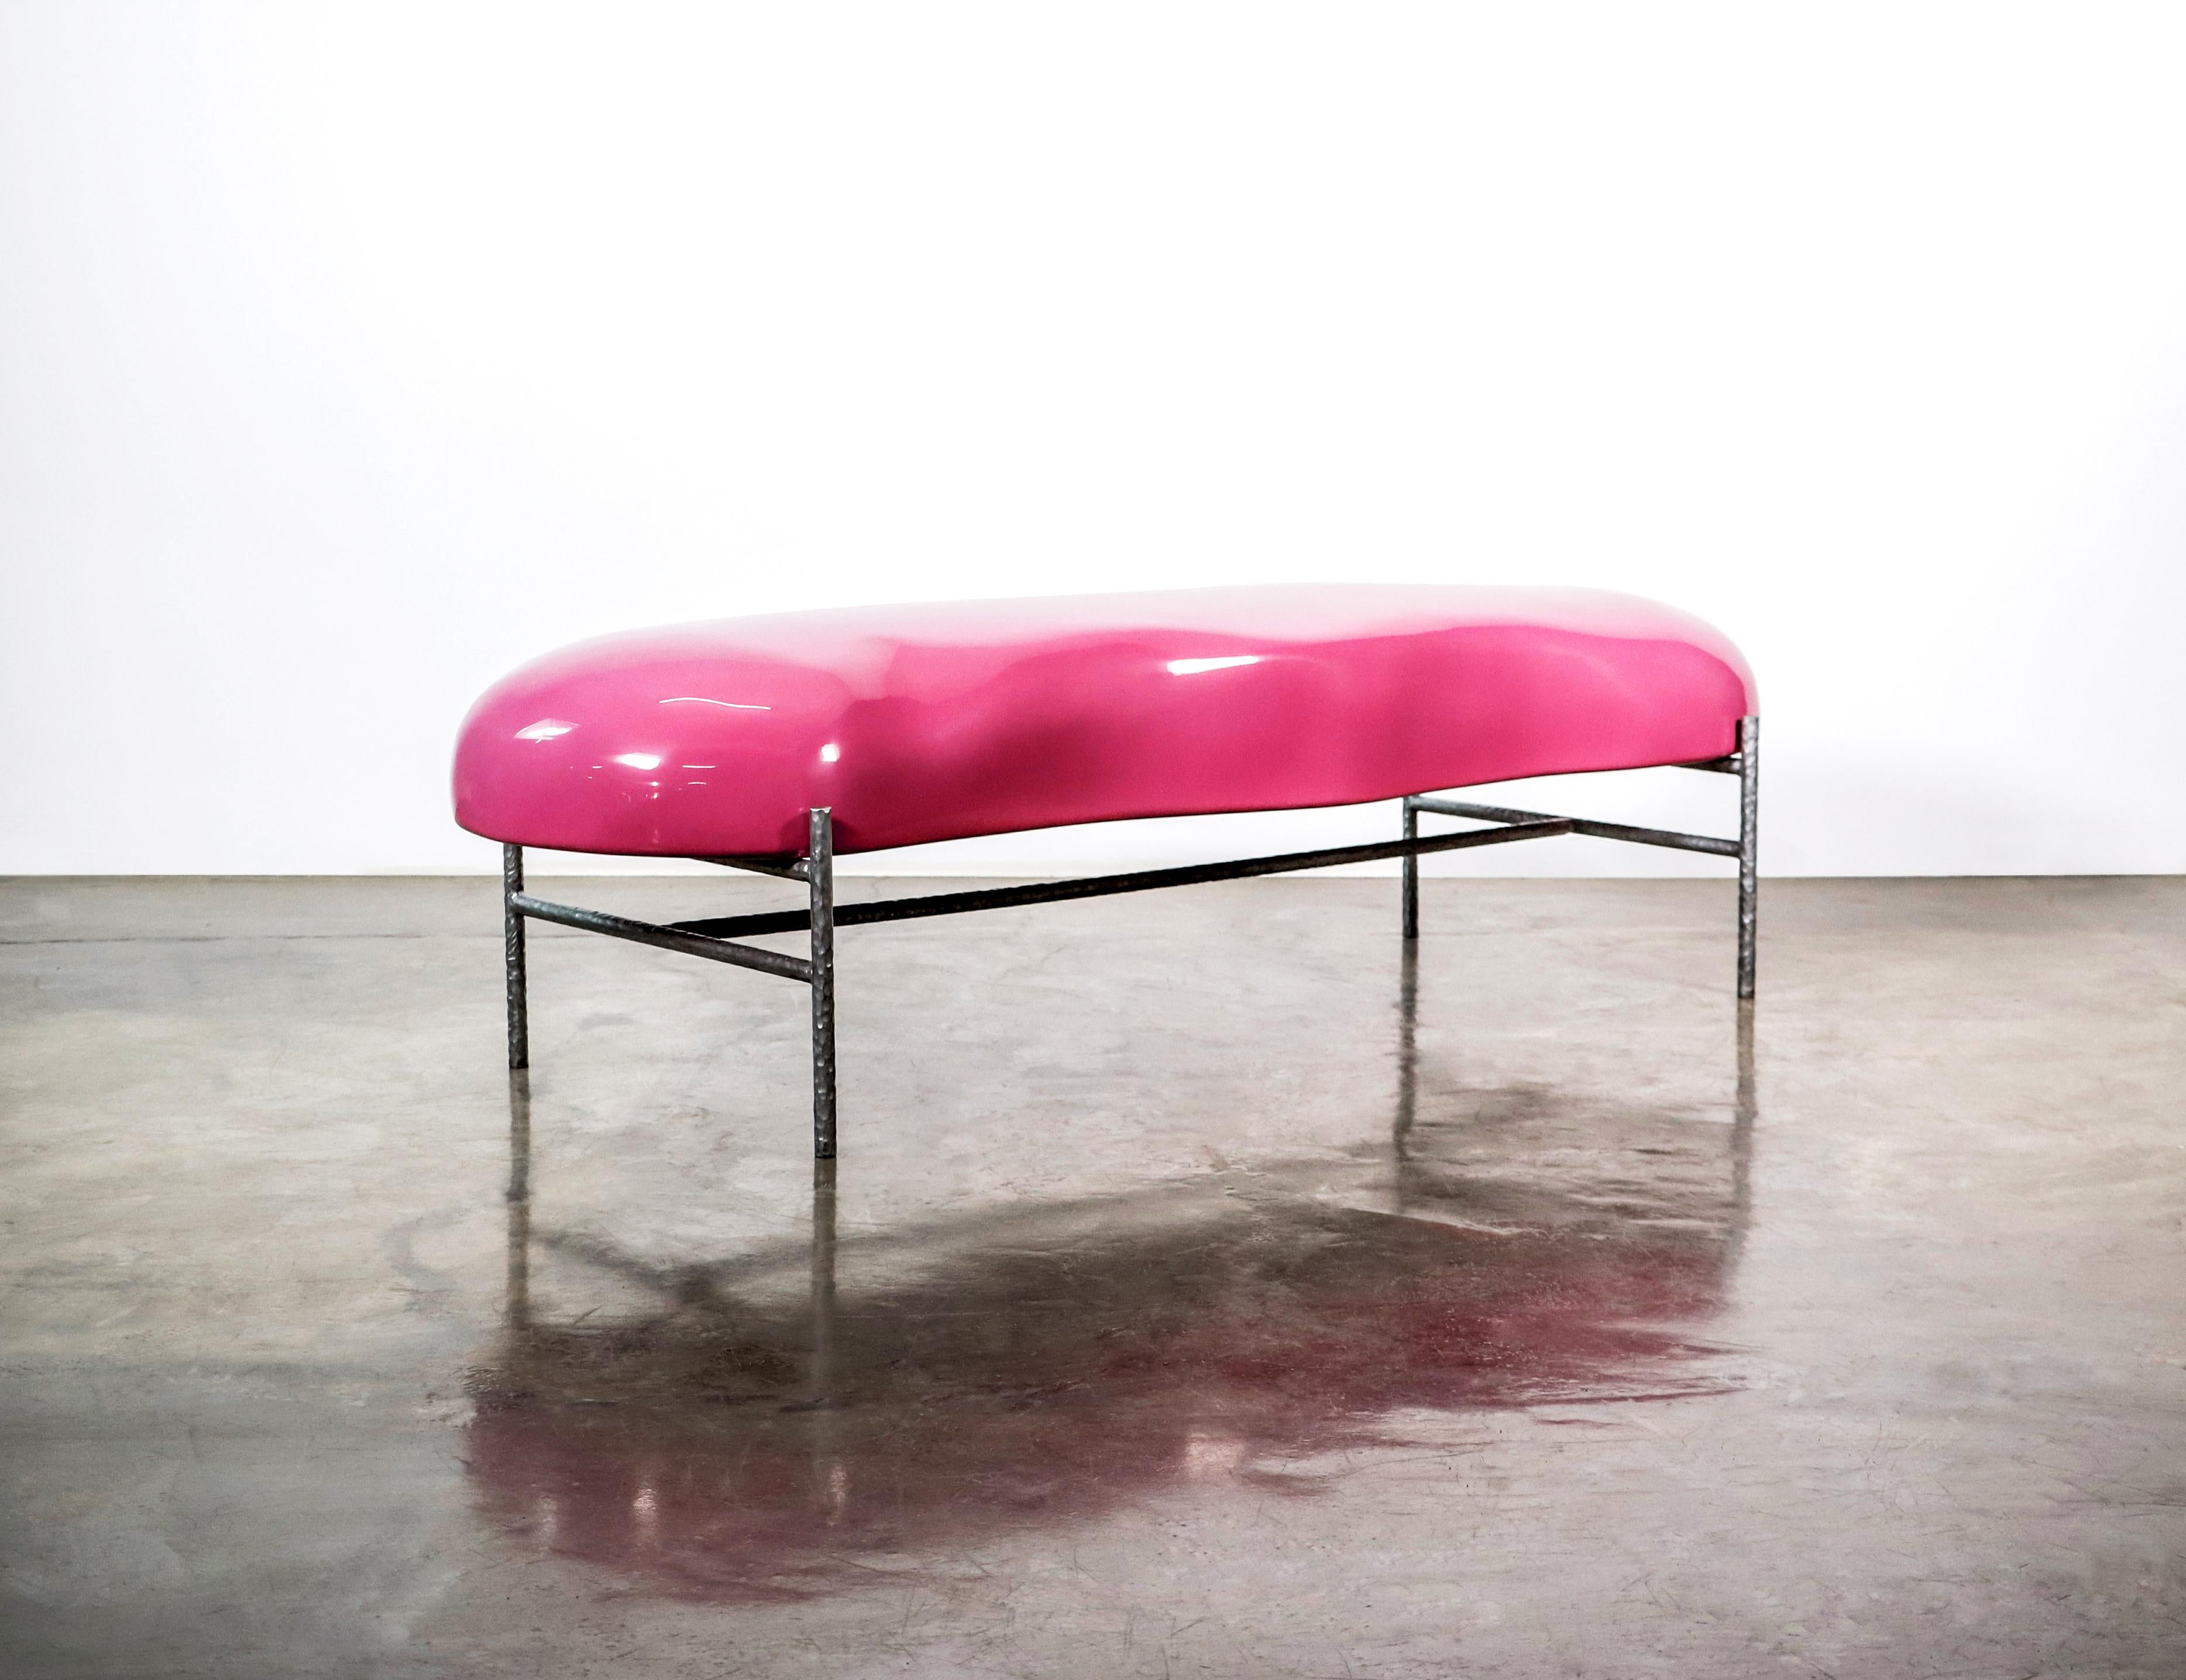 Lingua, a Modern Functional Art Collectible Fiberglass Iron Bench from Costantini

This playful functional sculpture by William Stuart of Costantini features a chiseled iron frame and a rigidly undulating fiberglass form as a 